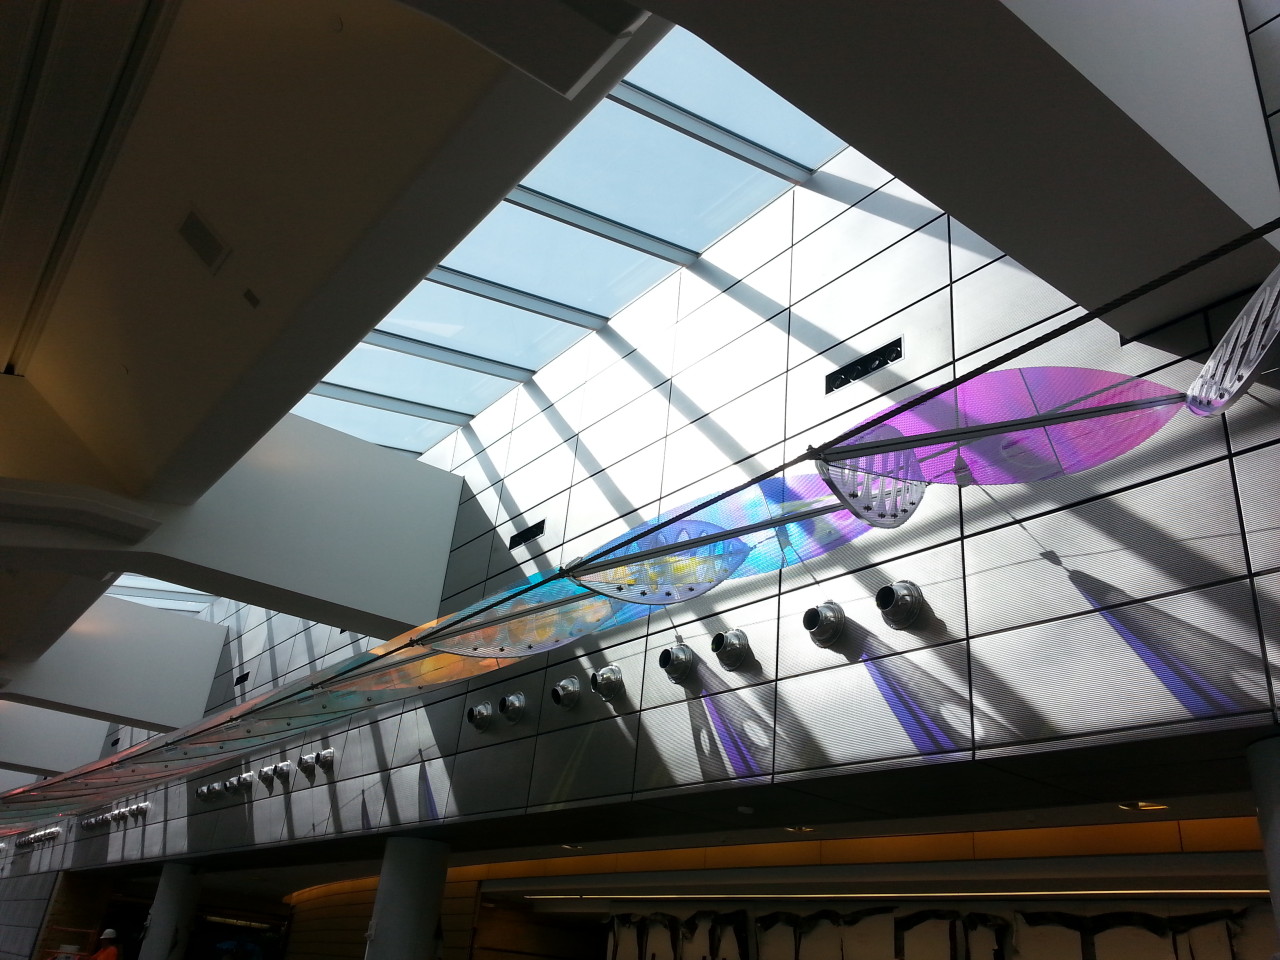 Ed Carpenter’s Wichita Dwight D. Eisenhower National Airport signature sculpture Aloft delights travelers with colorful laminated safety dichroic glass above as well as producing ever changing color patterns on the walls. | Image 11 | Ed Carpenter, Artist